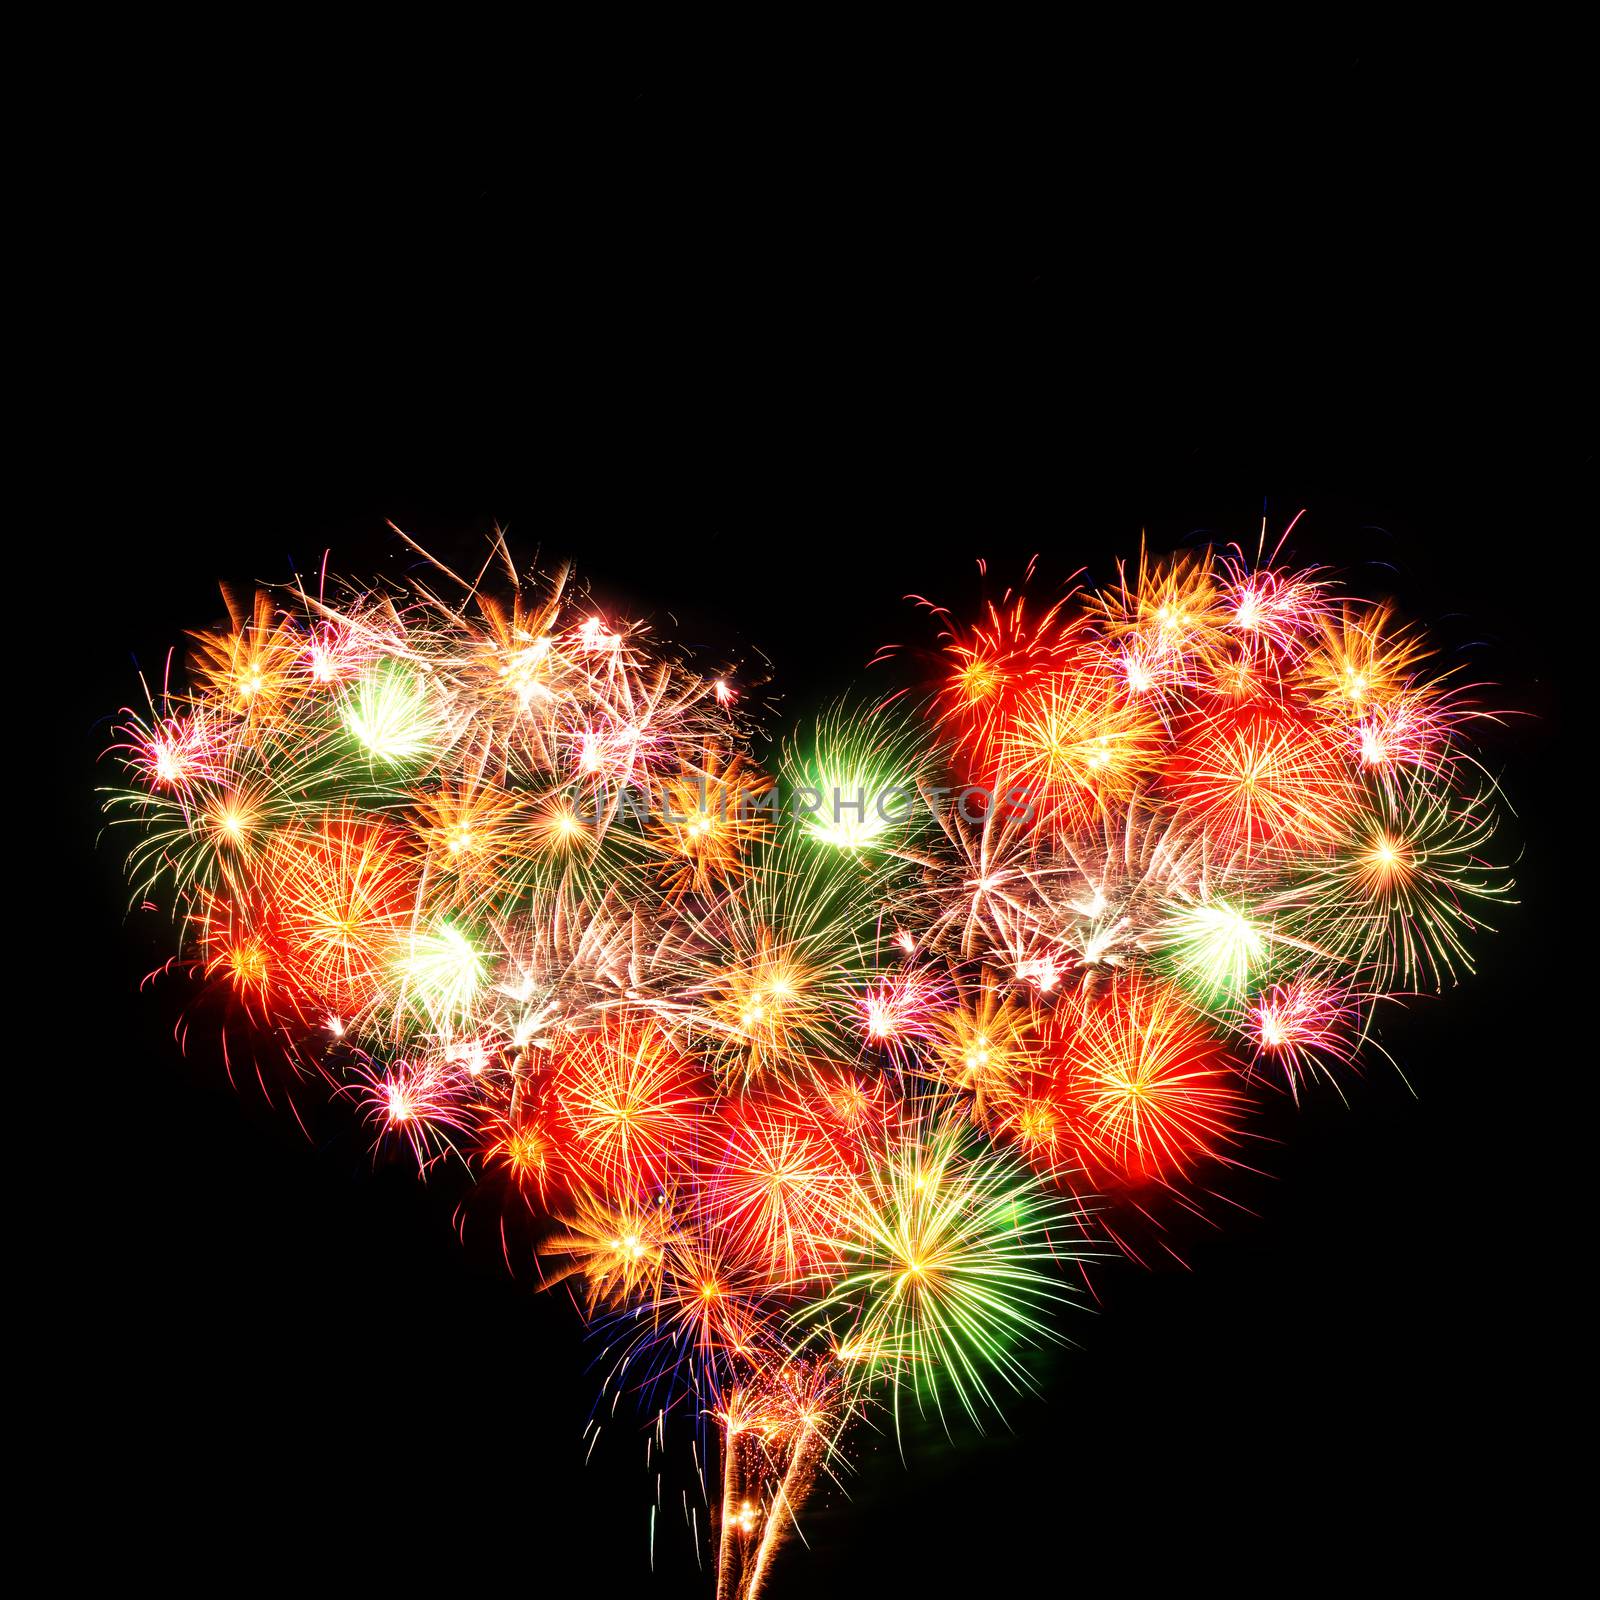 heart with different fireworks collage by NeydtStock